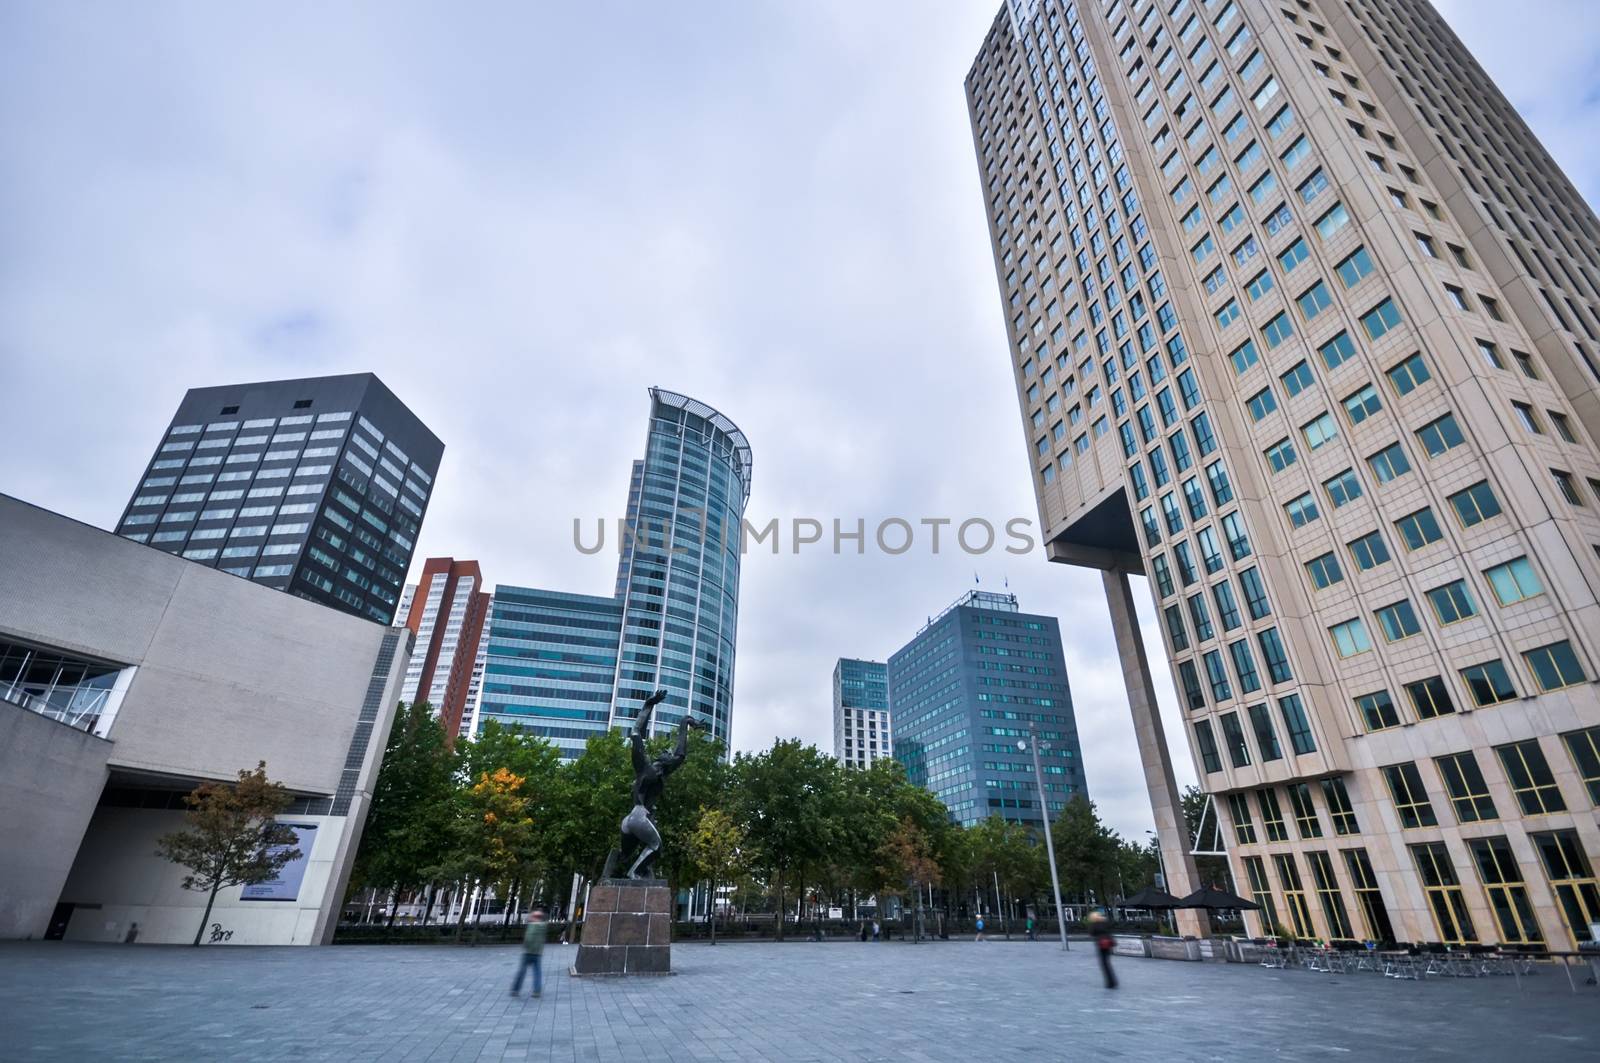 high-rise buildings on the streets of Rotterdam by vlaru